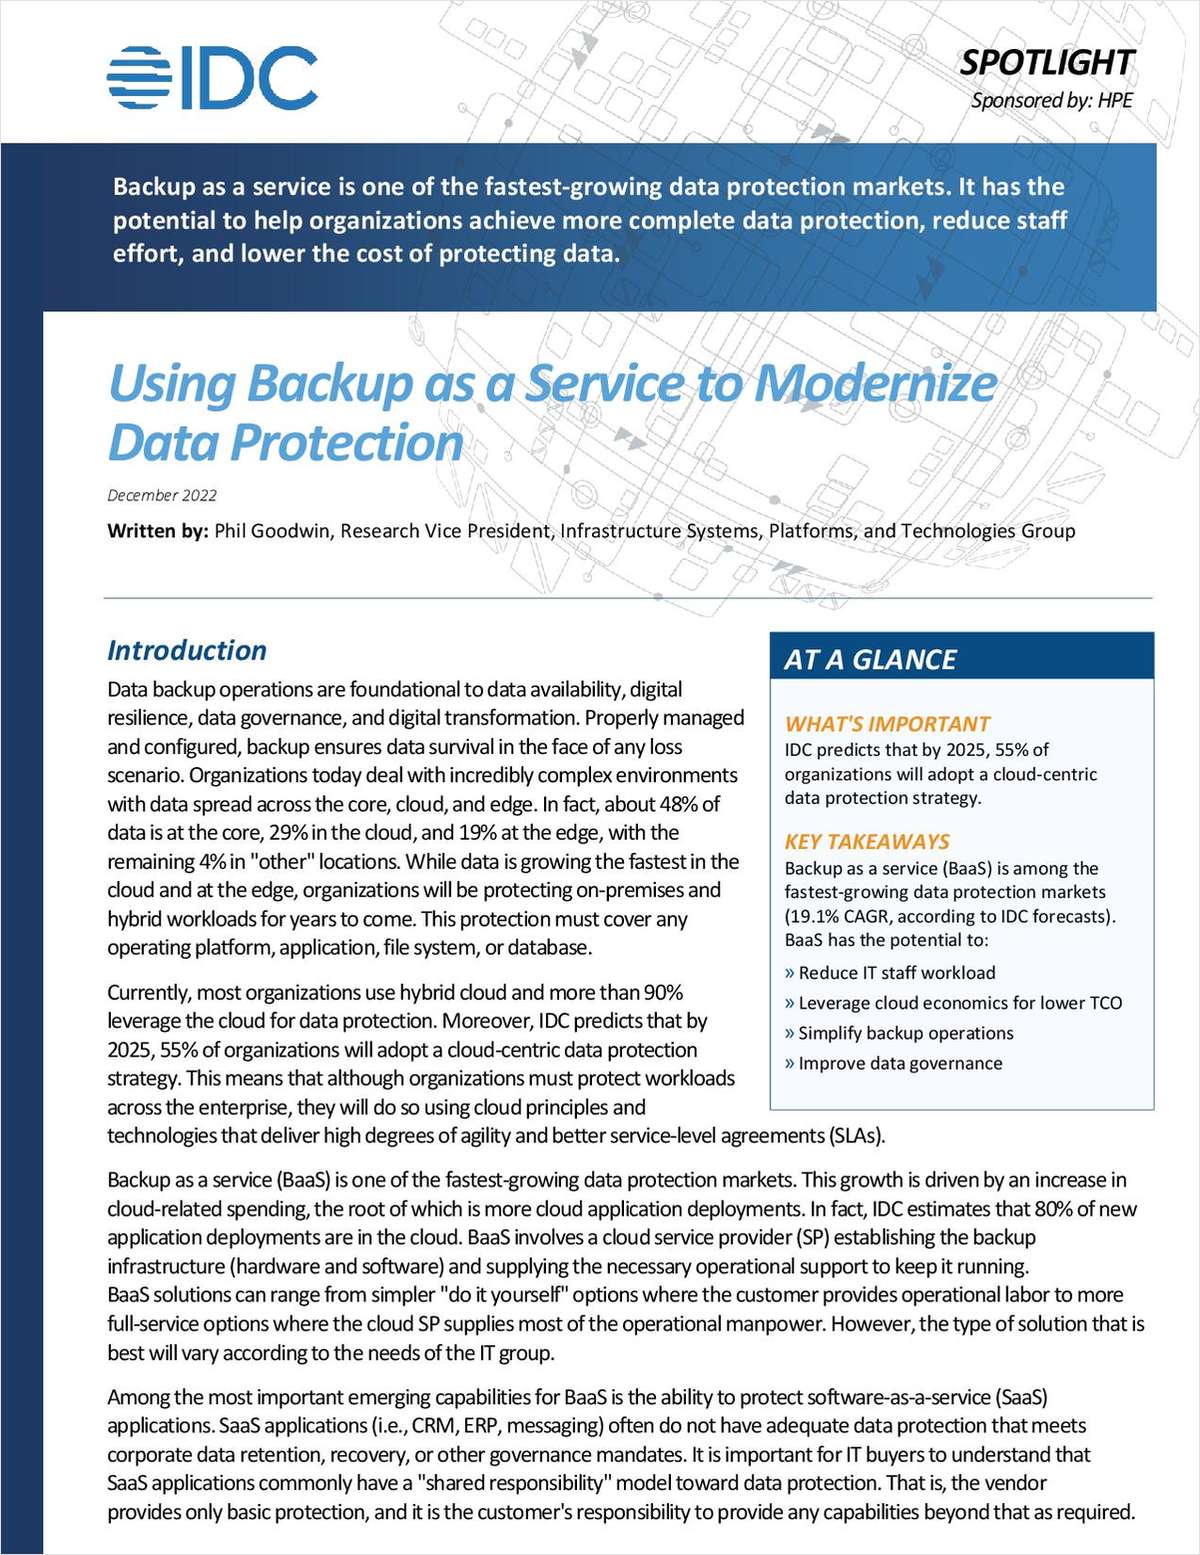 Using Backup as a Service to Modernize Data Protection